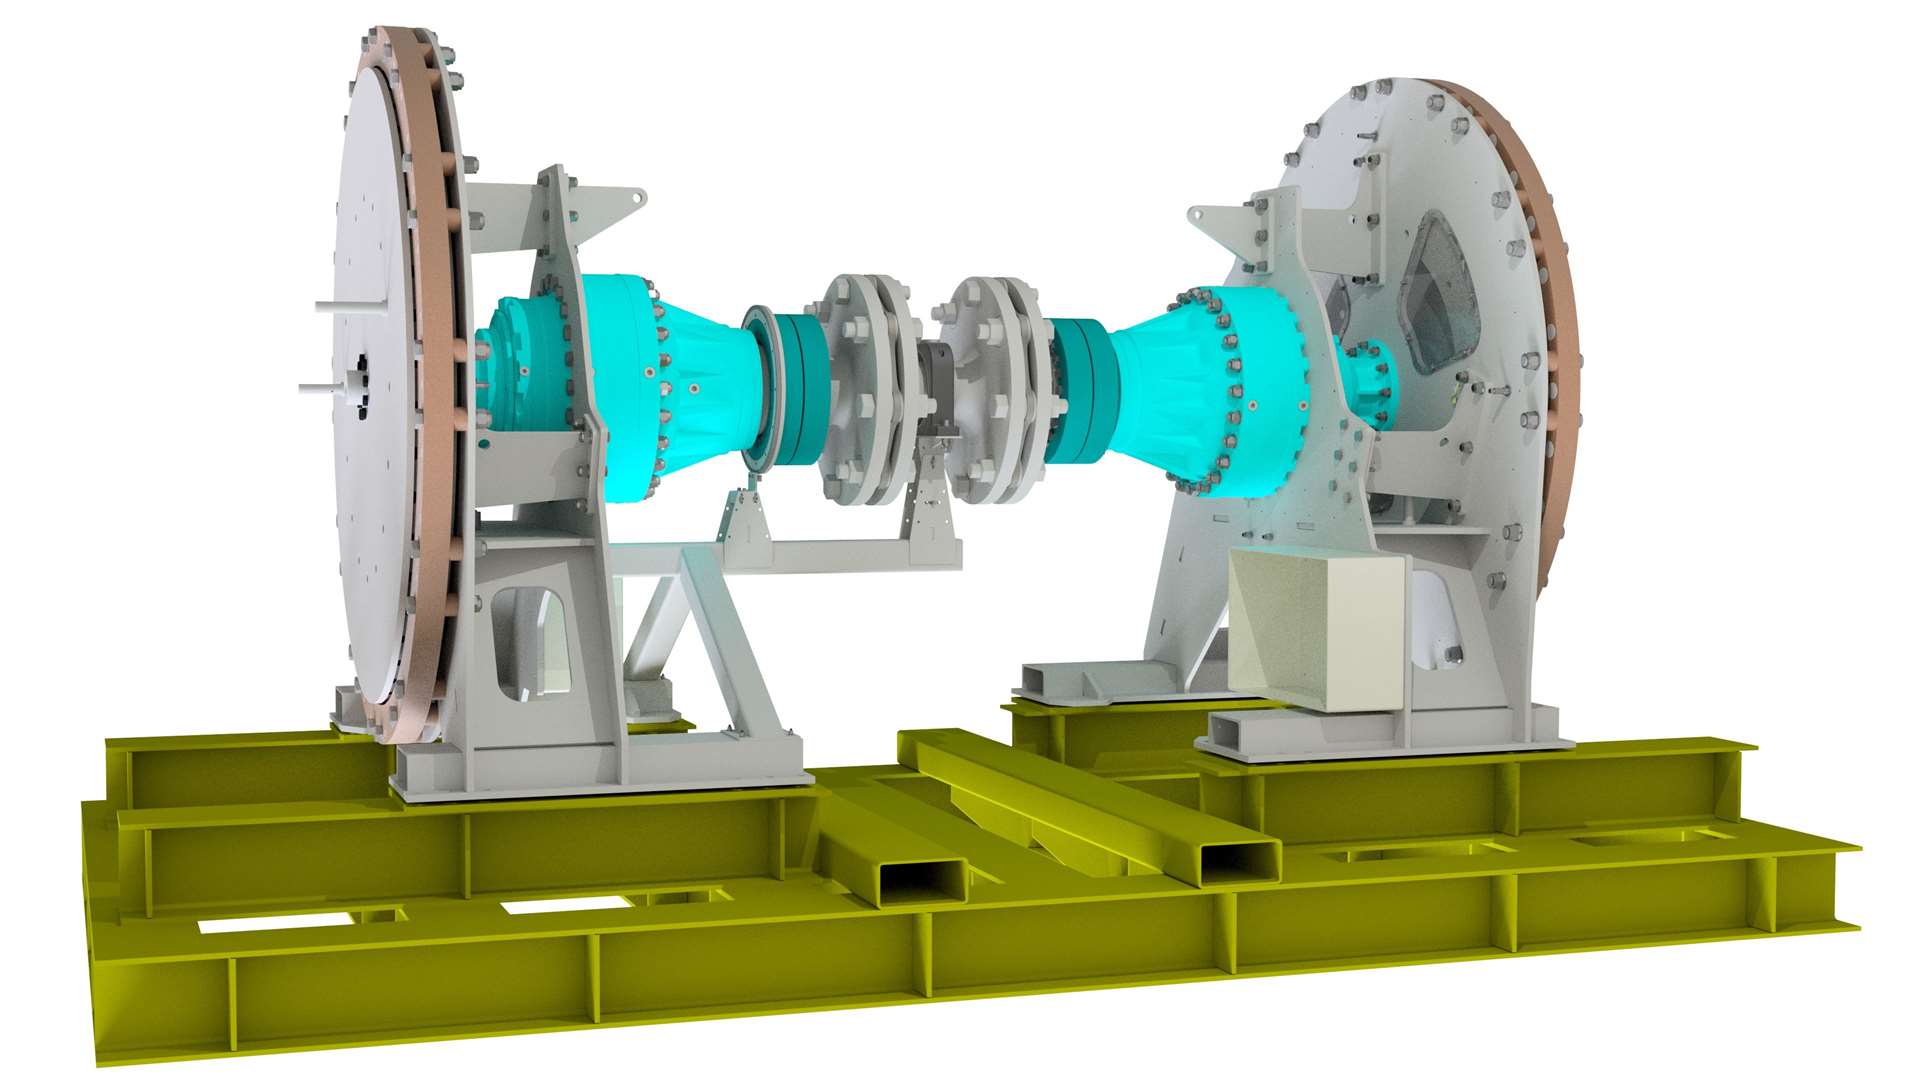 An image of the proposed C-GEN test rig.